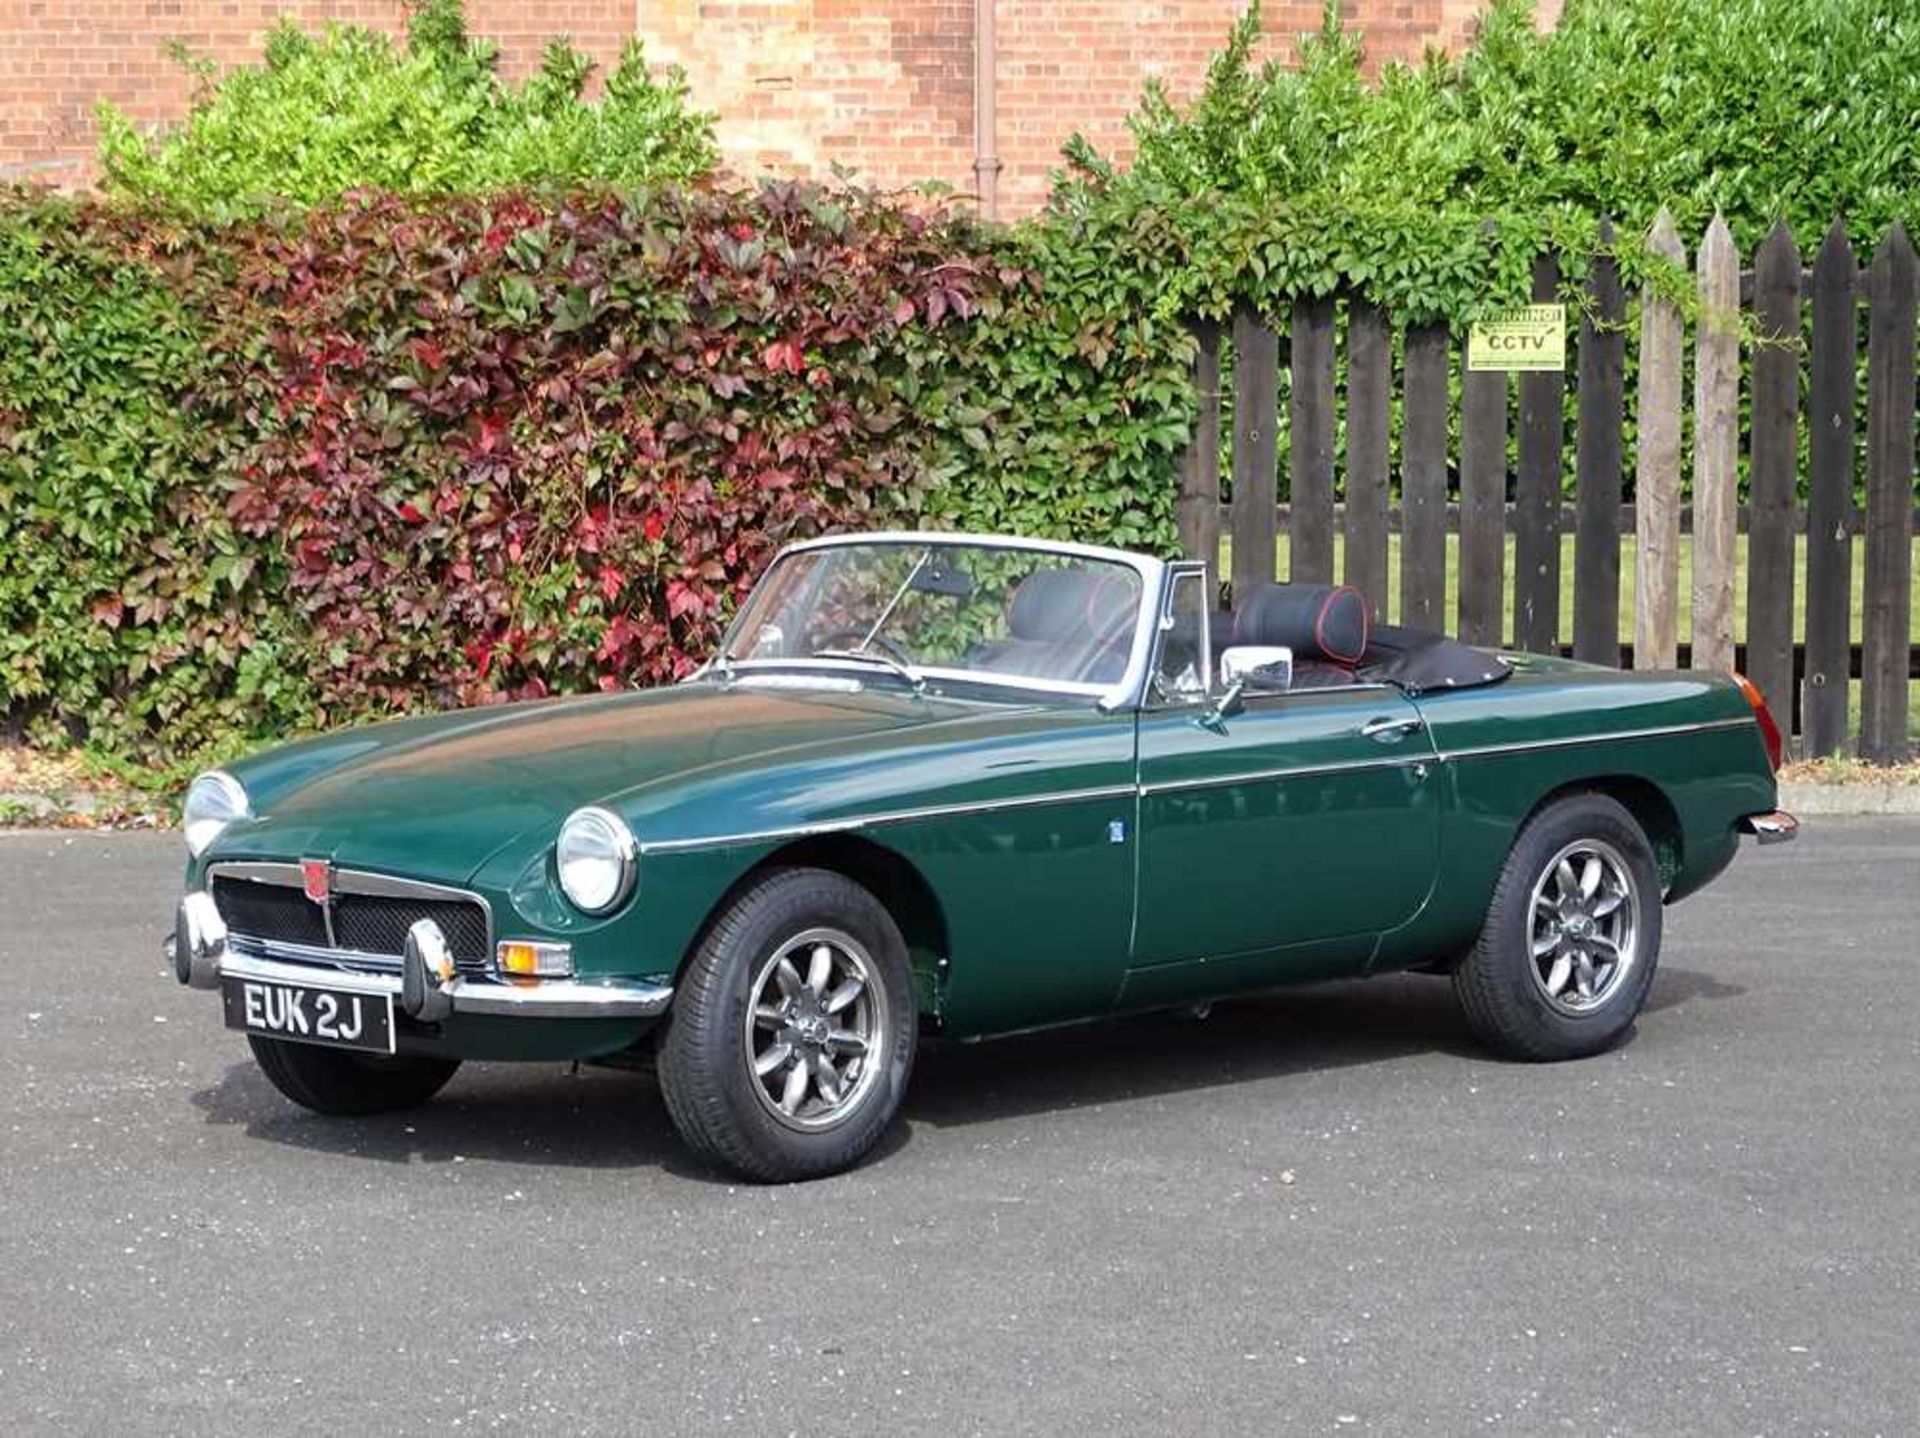 1971 MG B Roadster Restored at a cost of c.£33,000 - Image 7 of 43